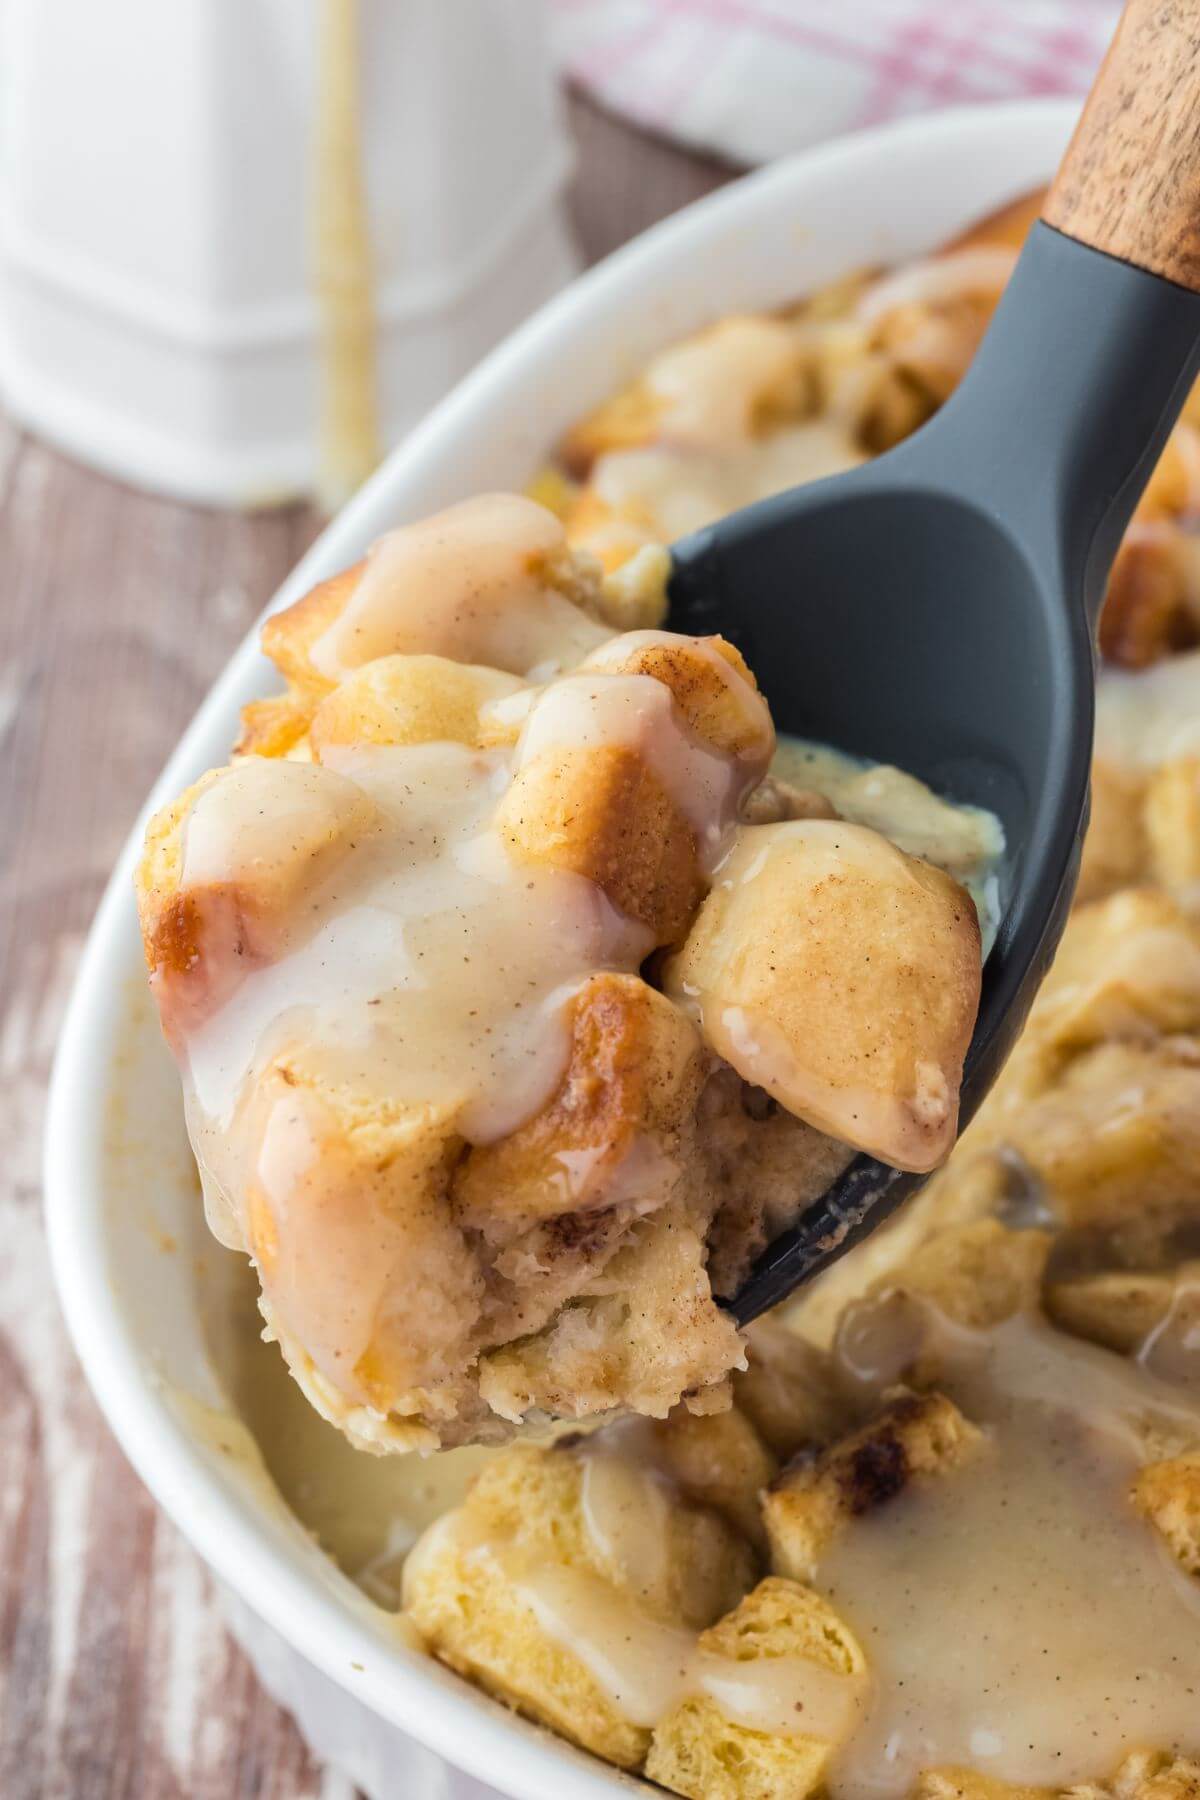 A dark serving spoon scoops up gooey bread pudding chunks above the full baking dish.